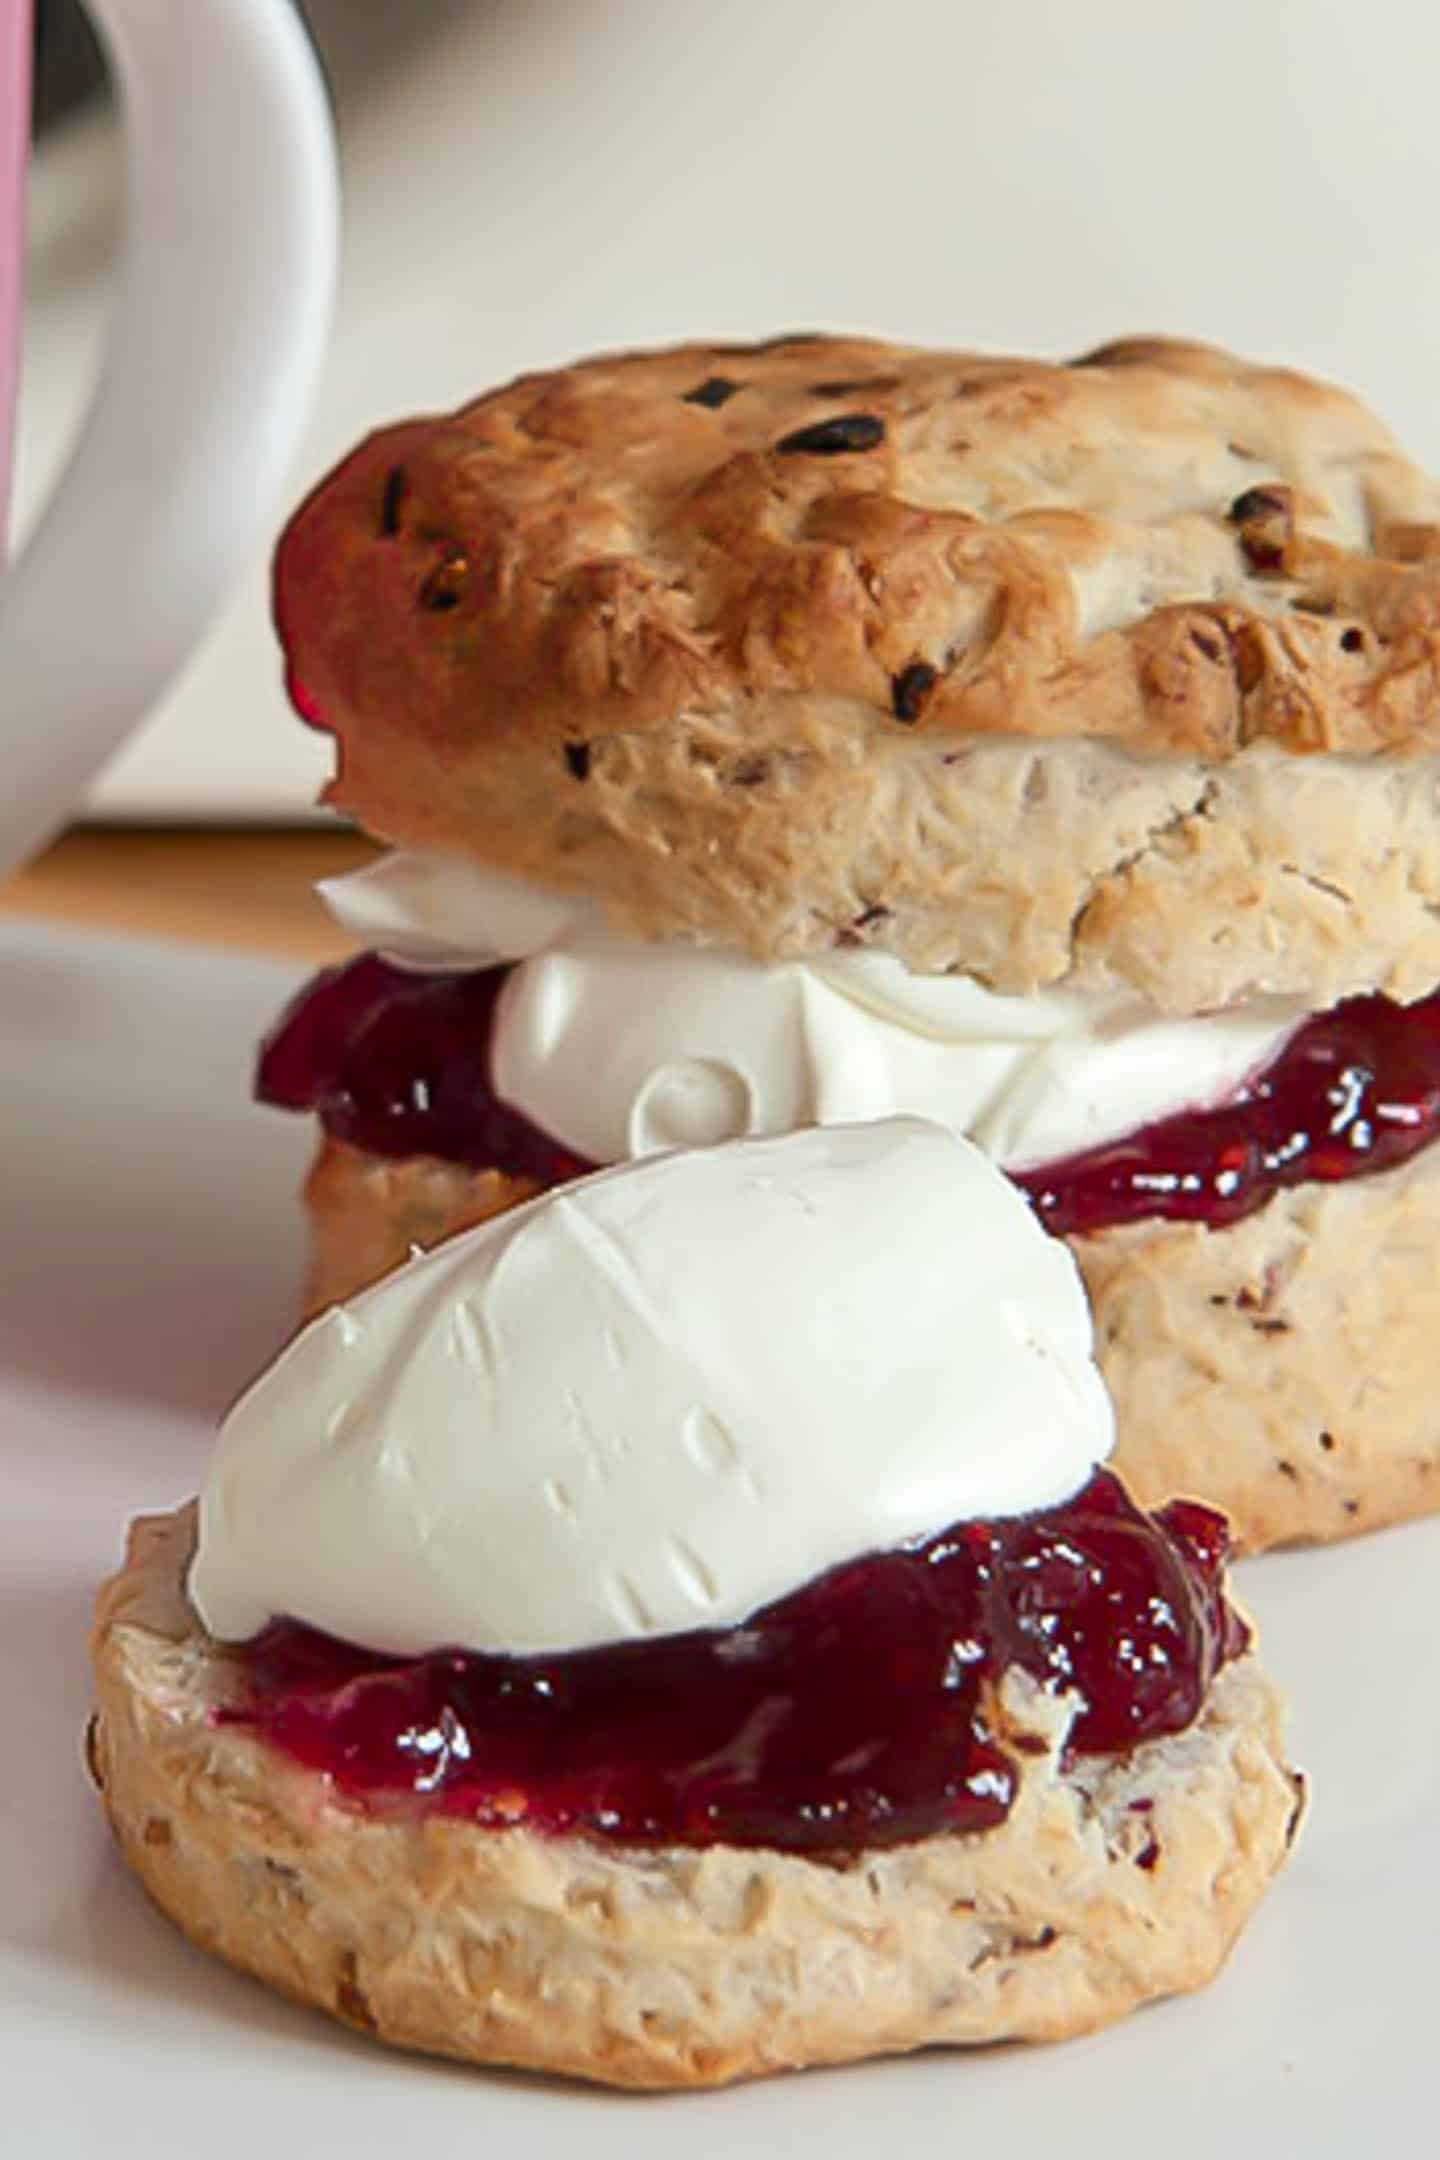 Raspberry and white chocolate scones topped with jam and cream